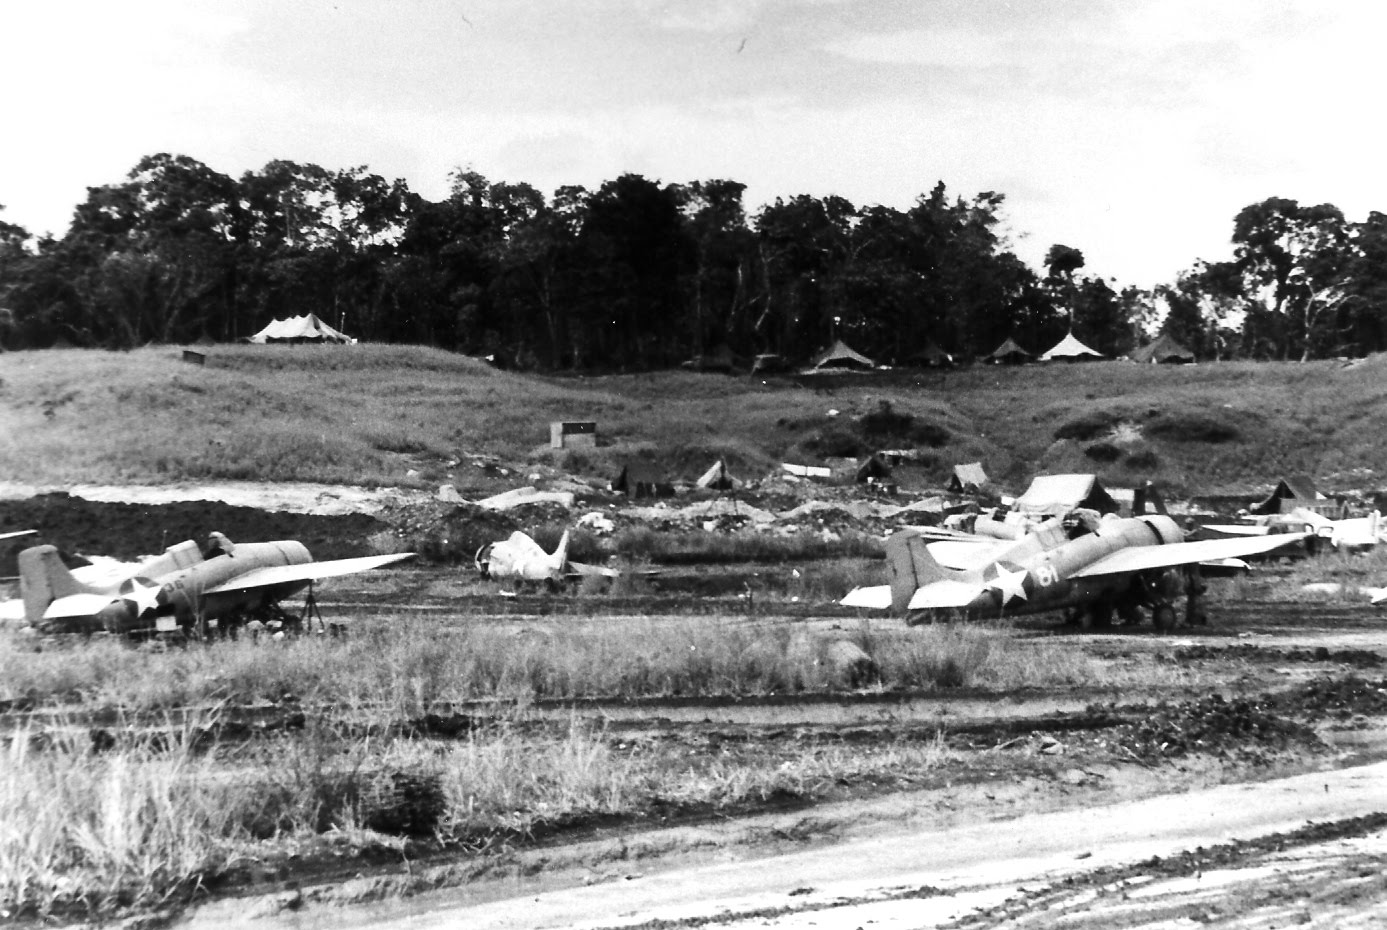 F4F-4 Wildcat fighters of a Marine Fighting Squadron at rest on Henderson Field, Guadalcanal, Solomons, 1942-43.